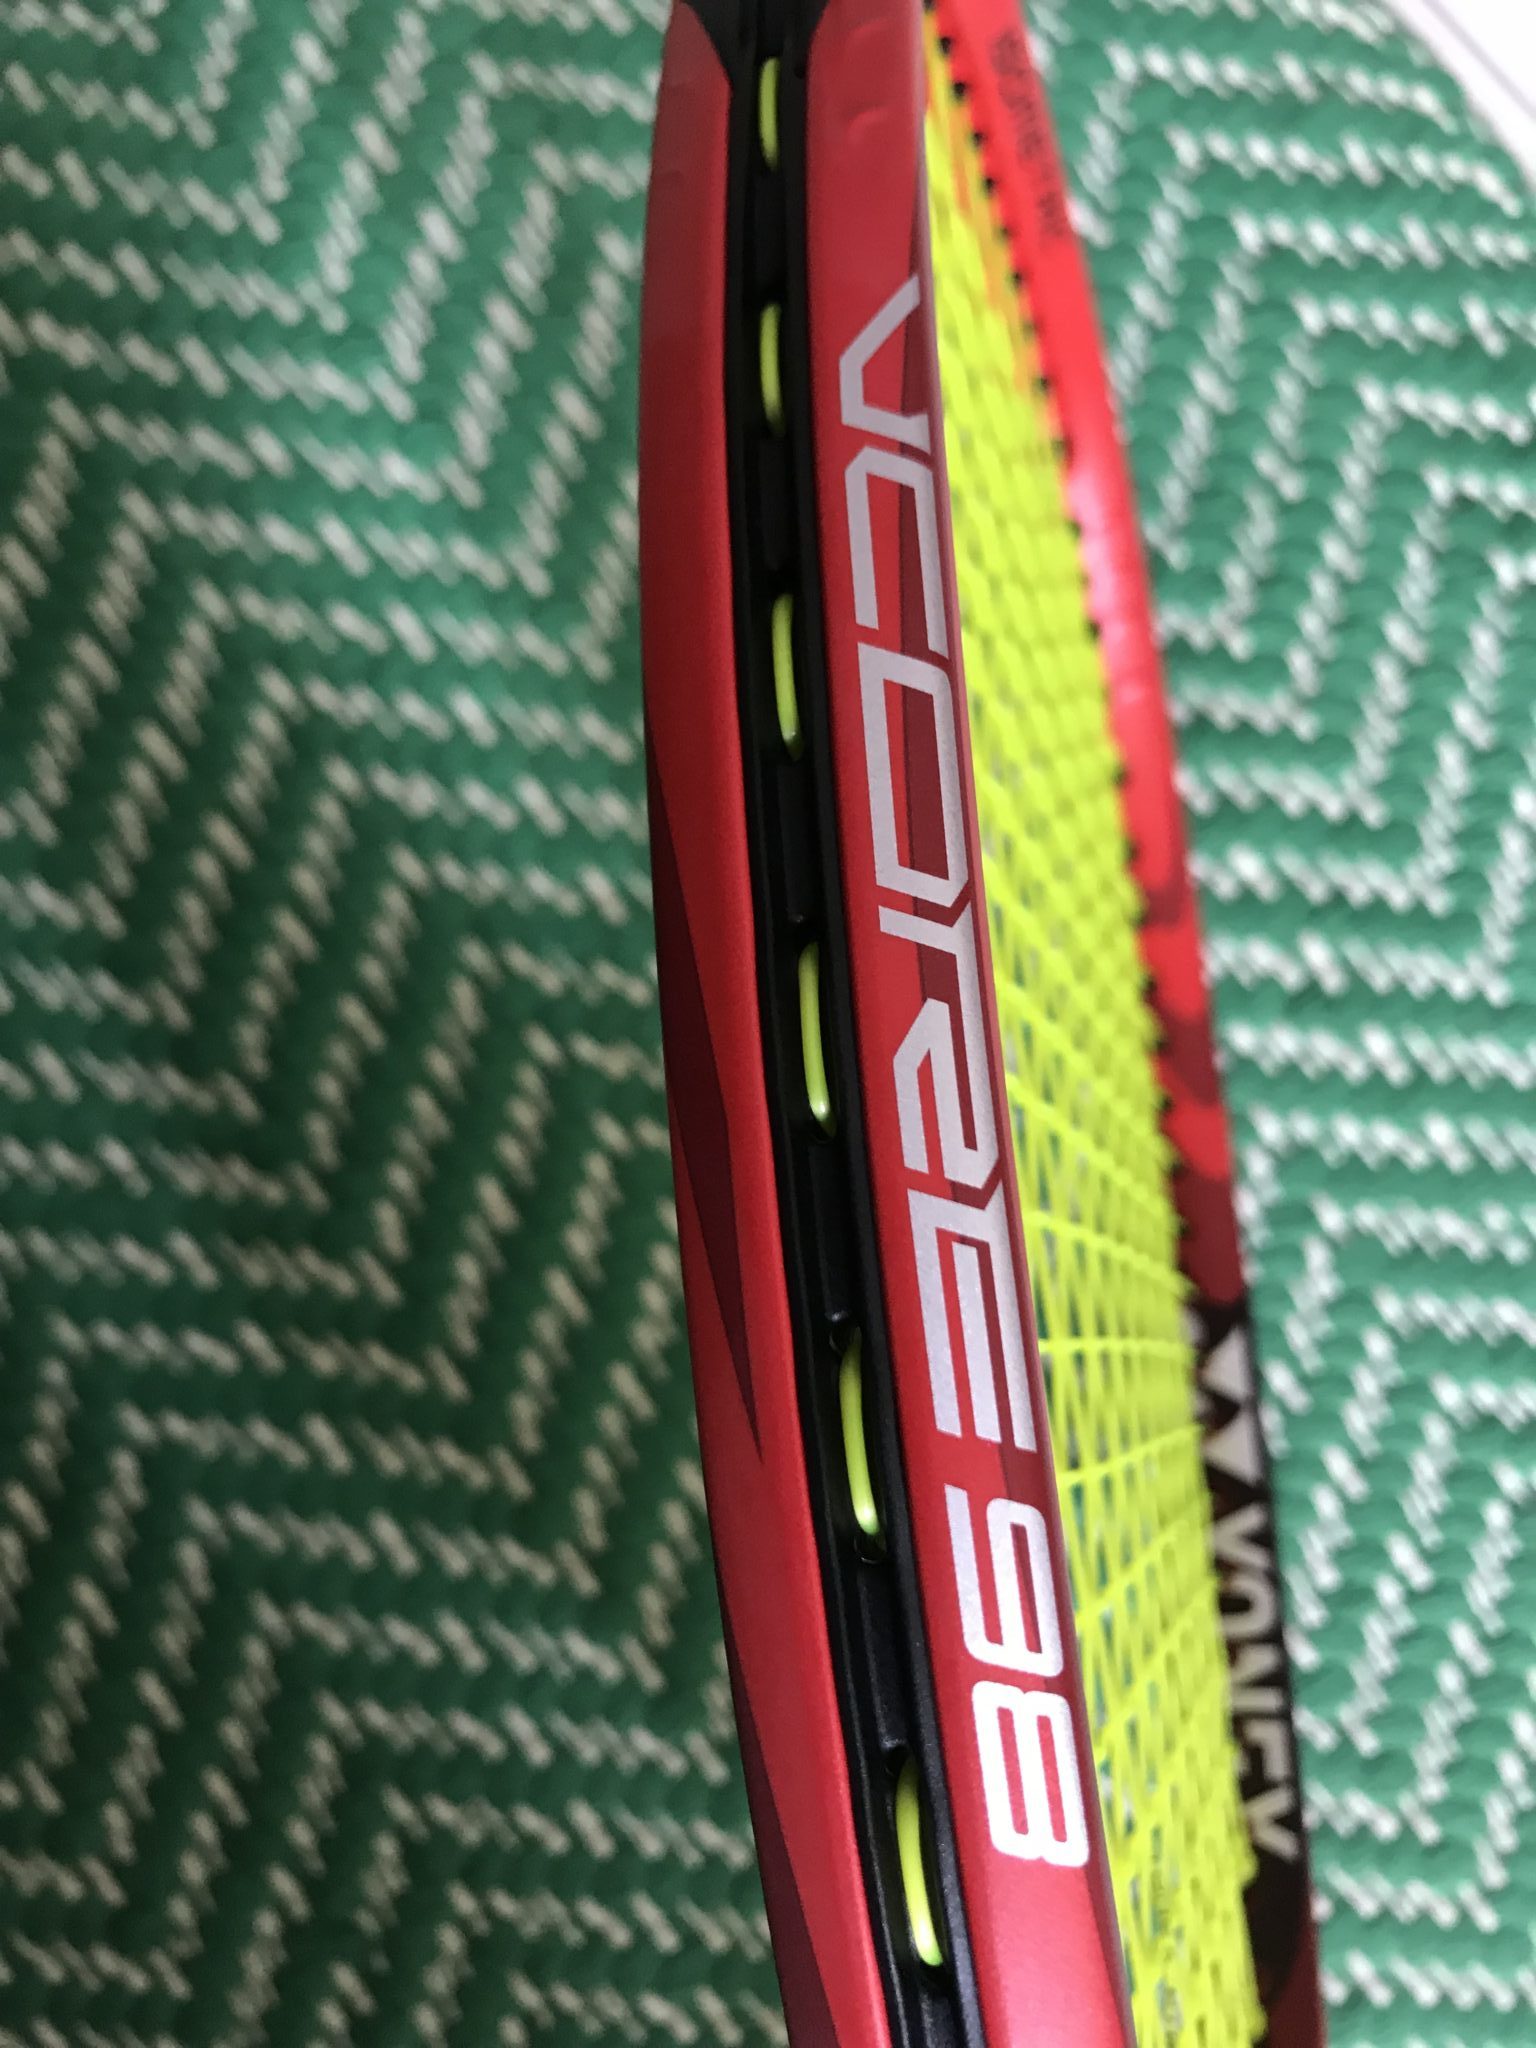 Yonex Tennis Racquet VCORE Si 98 Power/Spin for All Round Players UNSTRUNG G2 